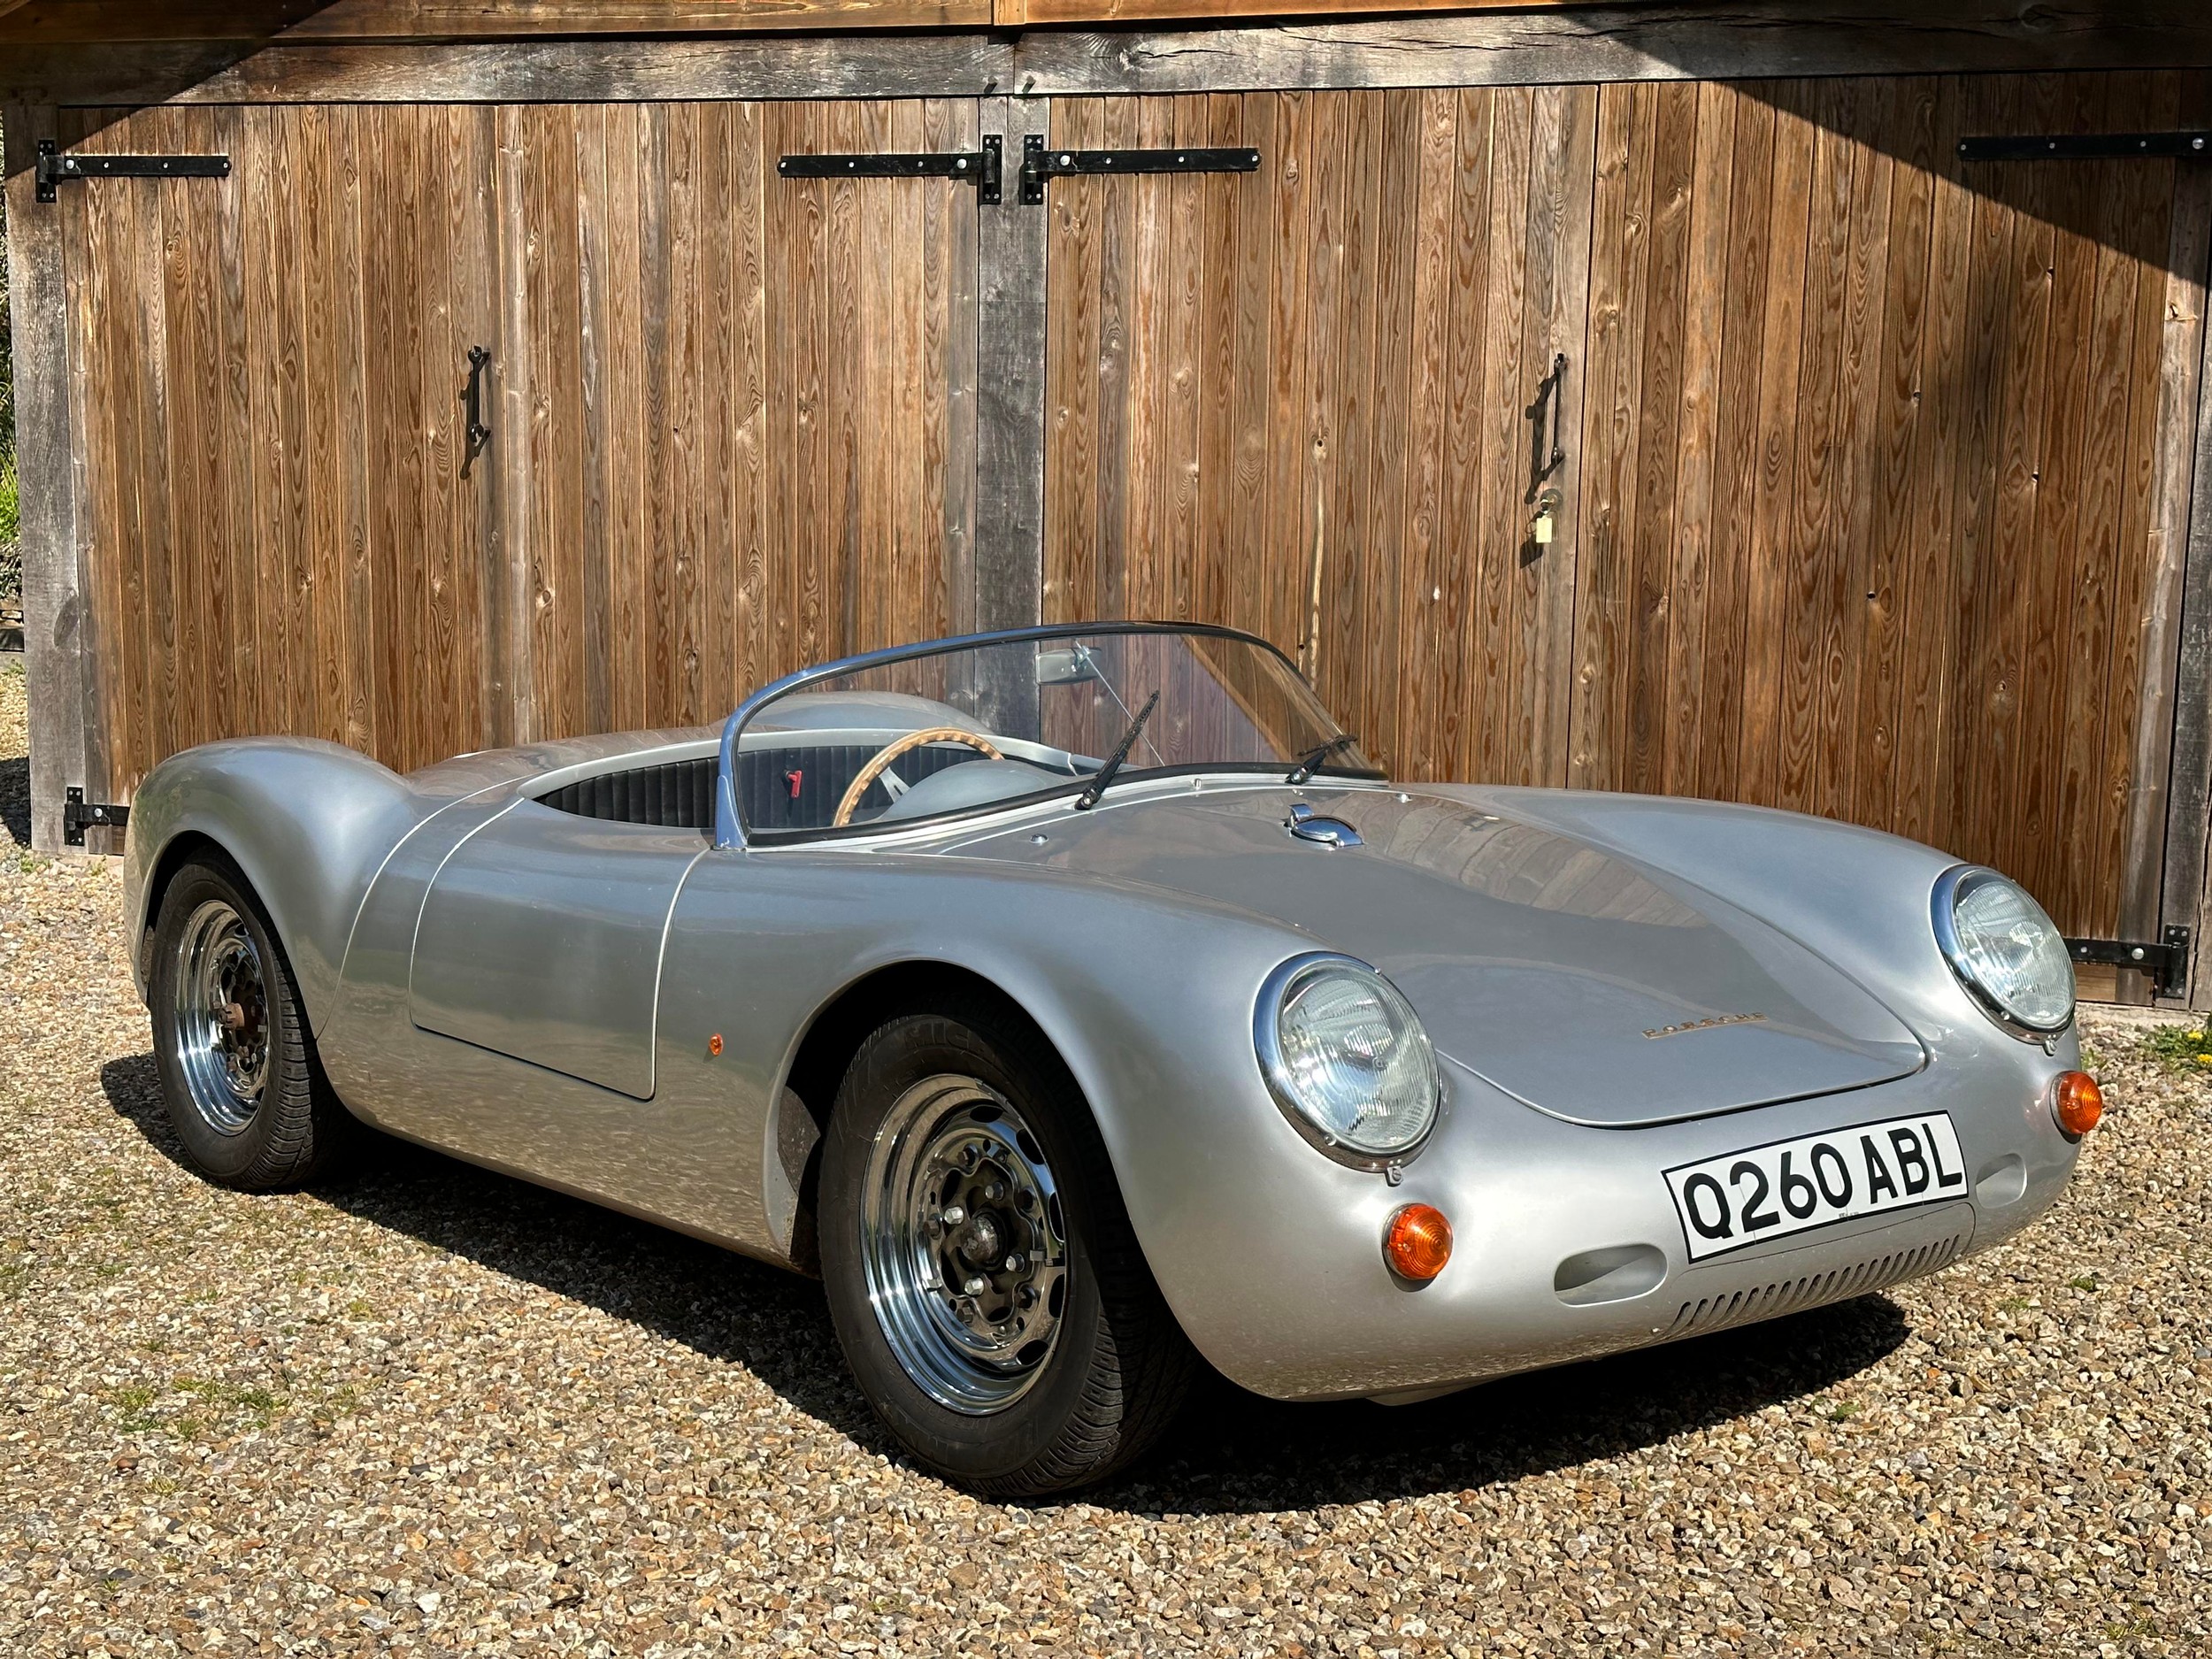 1996 TRAC Technic Porsche 550 Spyder Replica Registration Number Q260 ABL Metallic silver with a - Image 2 of 65